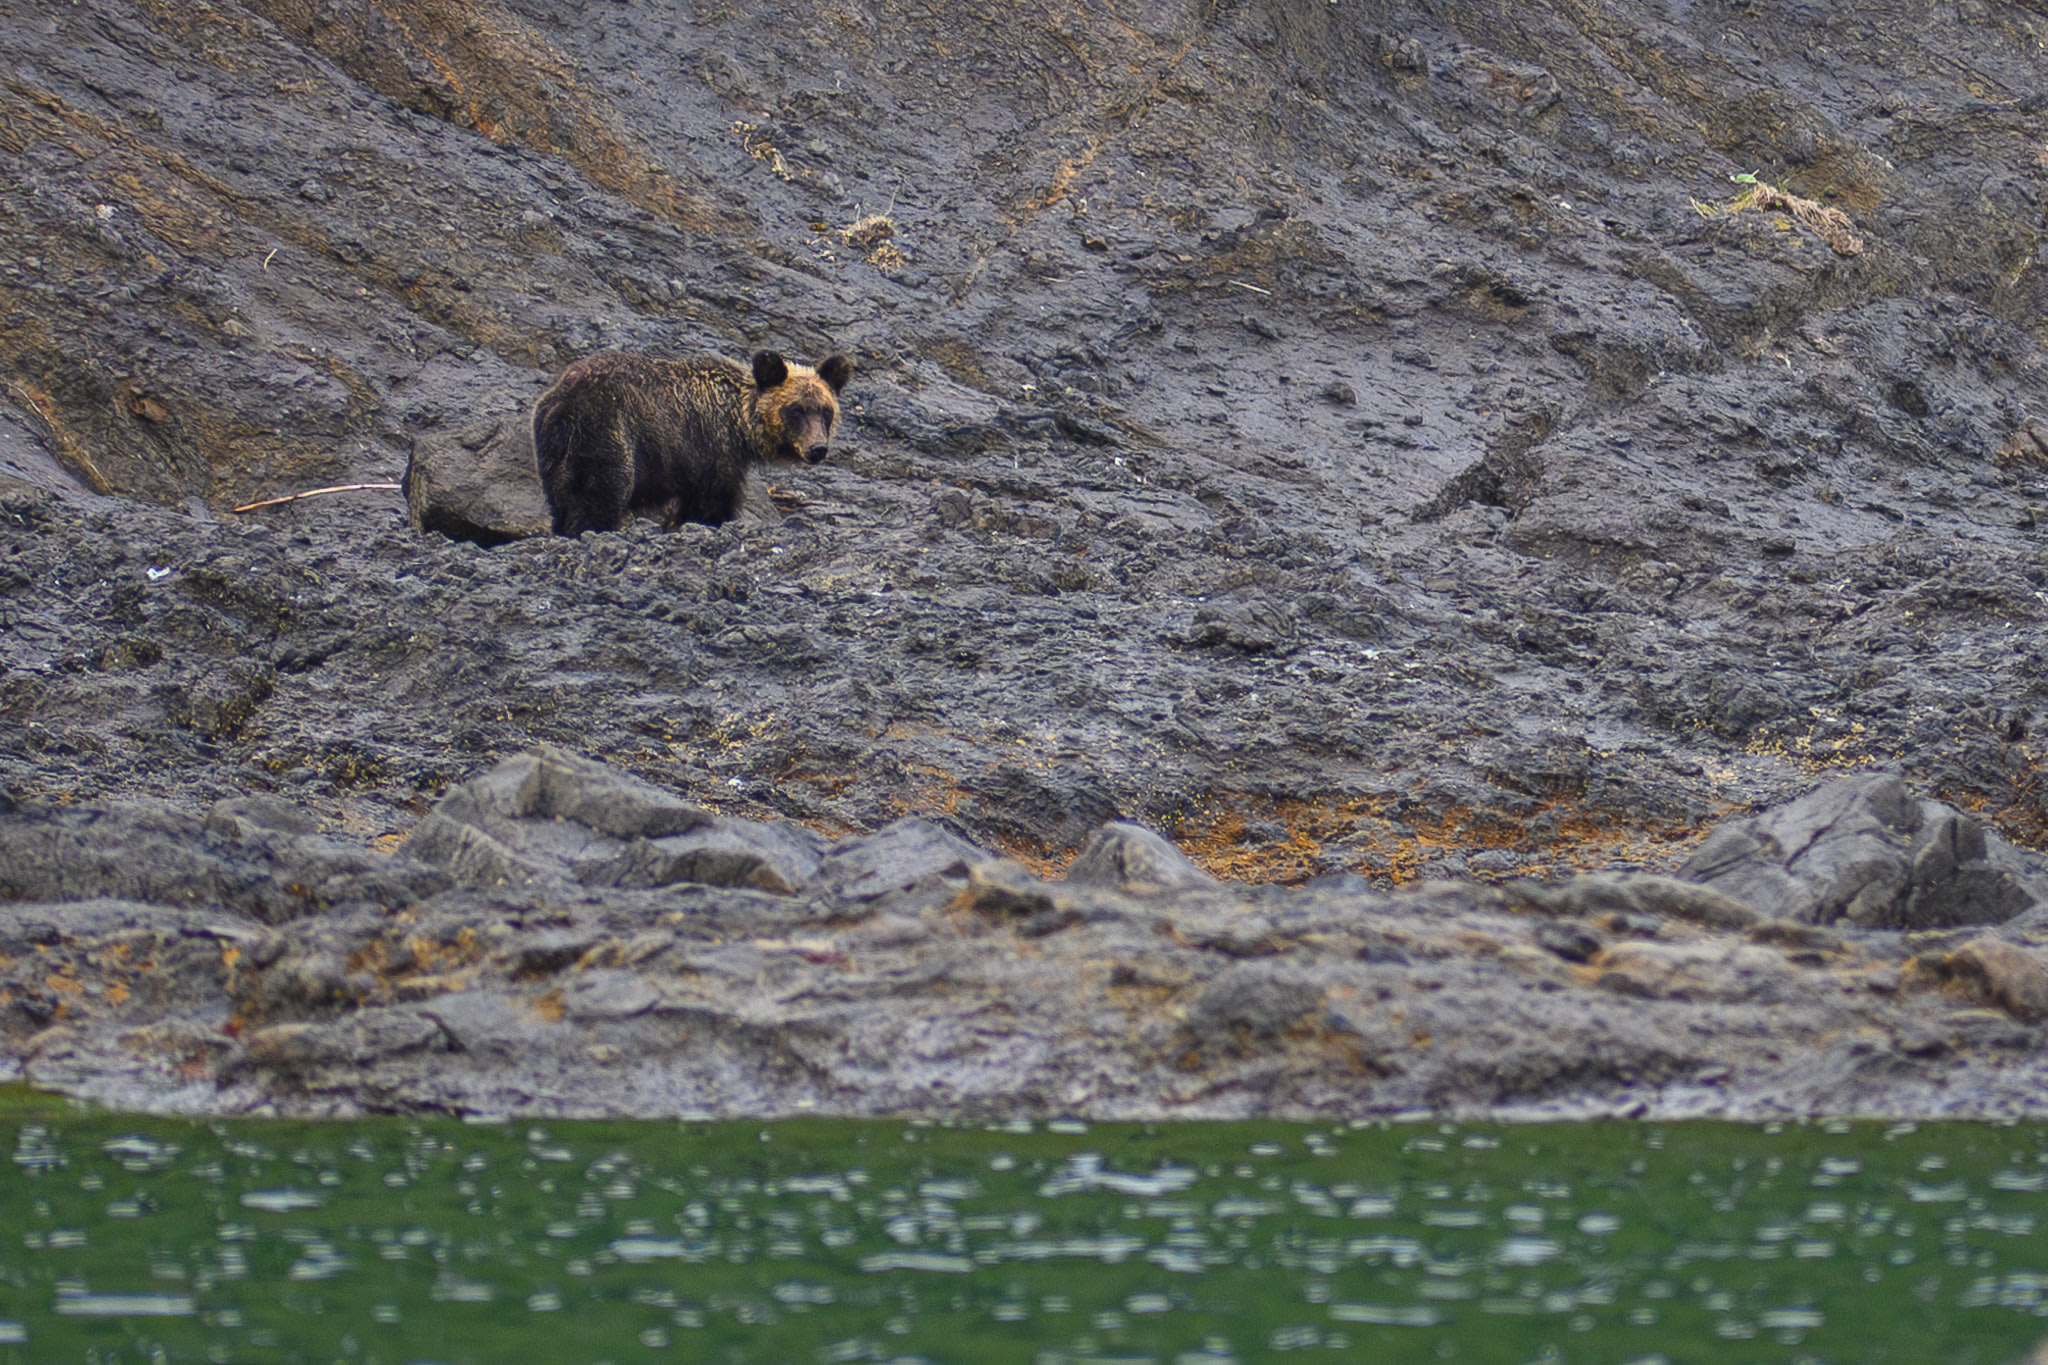 A brown bear on a rocky coastline looks back over its shoulder at the viewer.